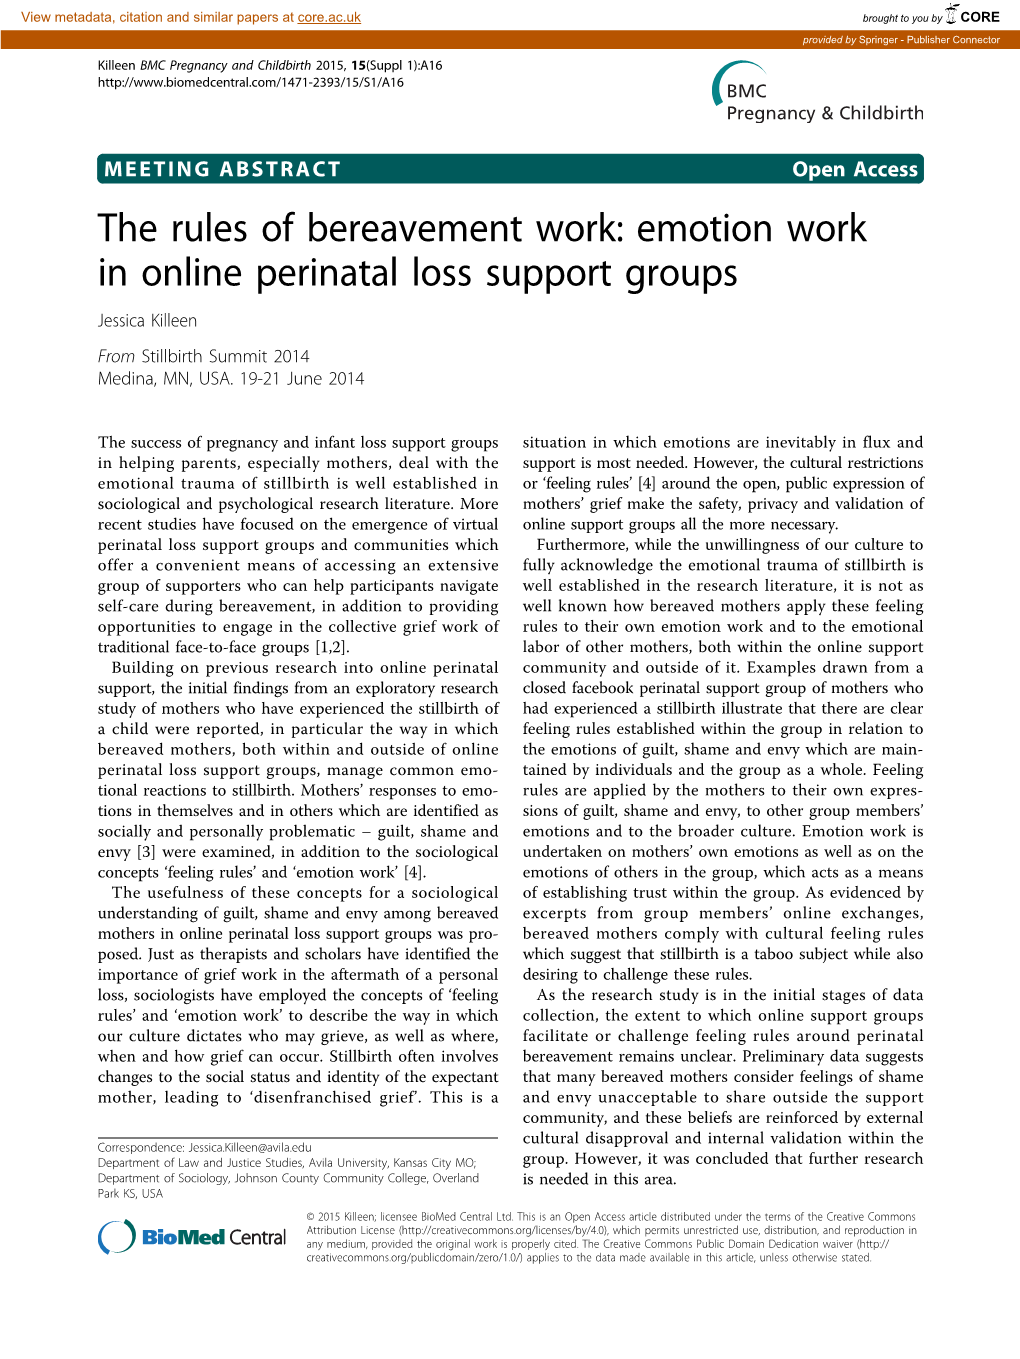 The Rules of Bereavement Work: Emotion Work in Online Perinatal Loss Support Groups Jessica Killeen from Stillbirth Summit 2014 Medina, MN, USA